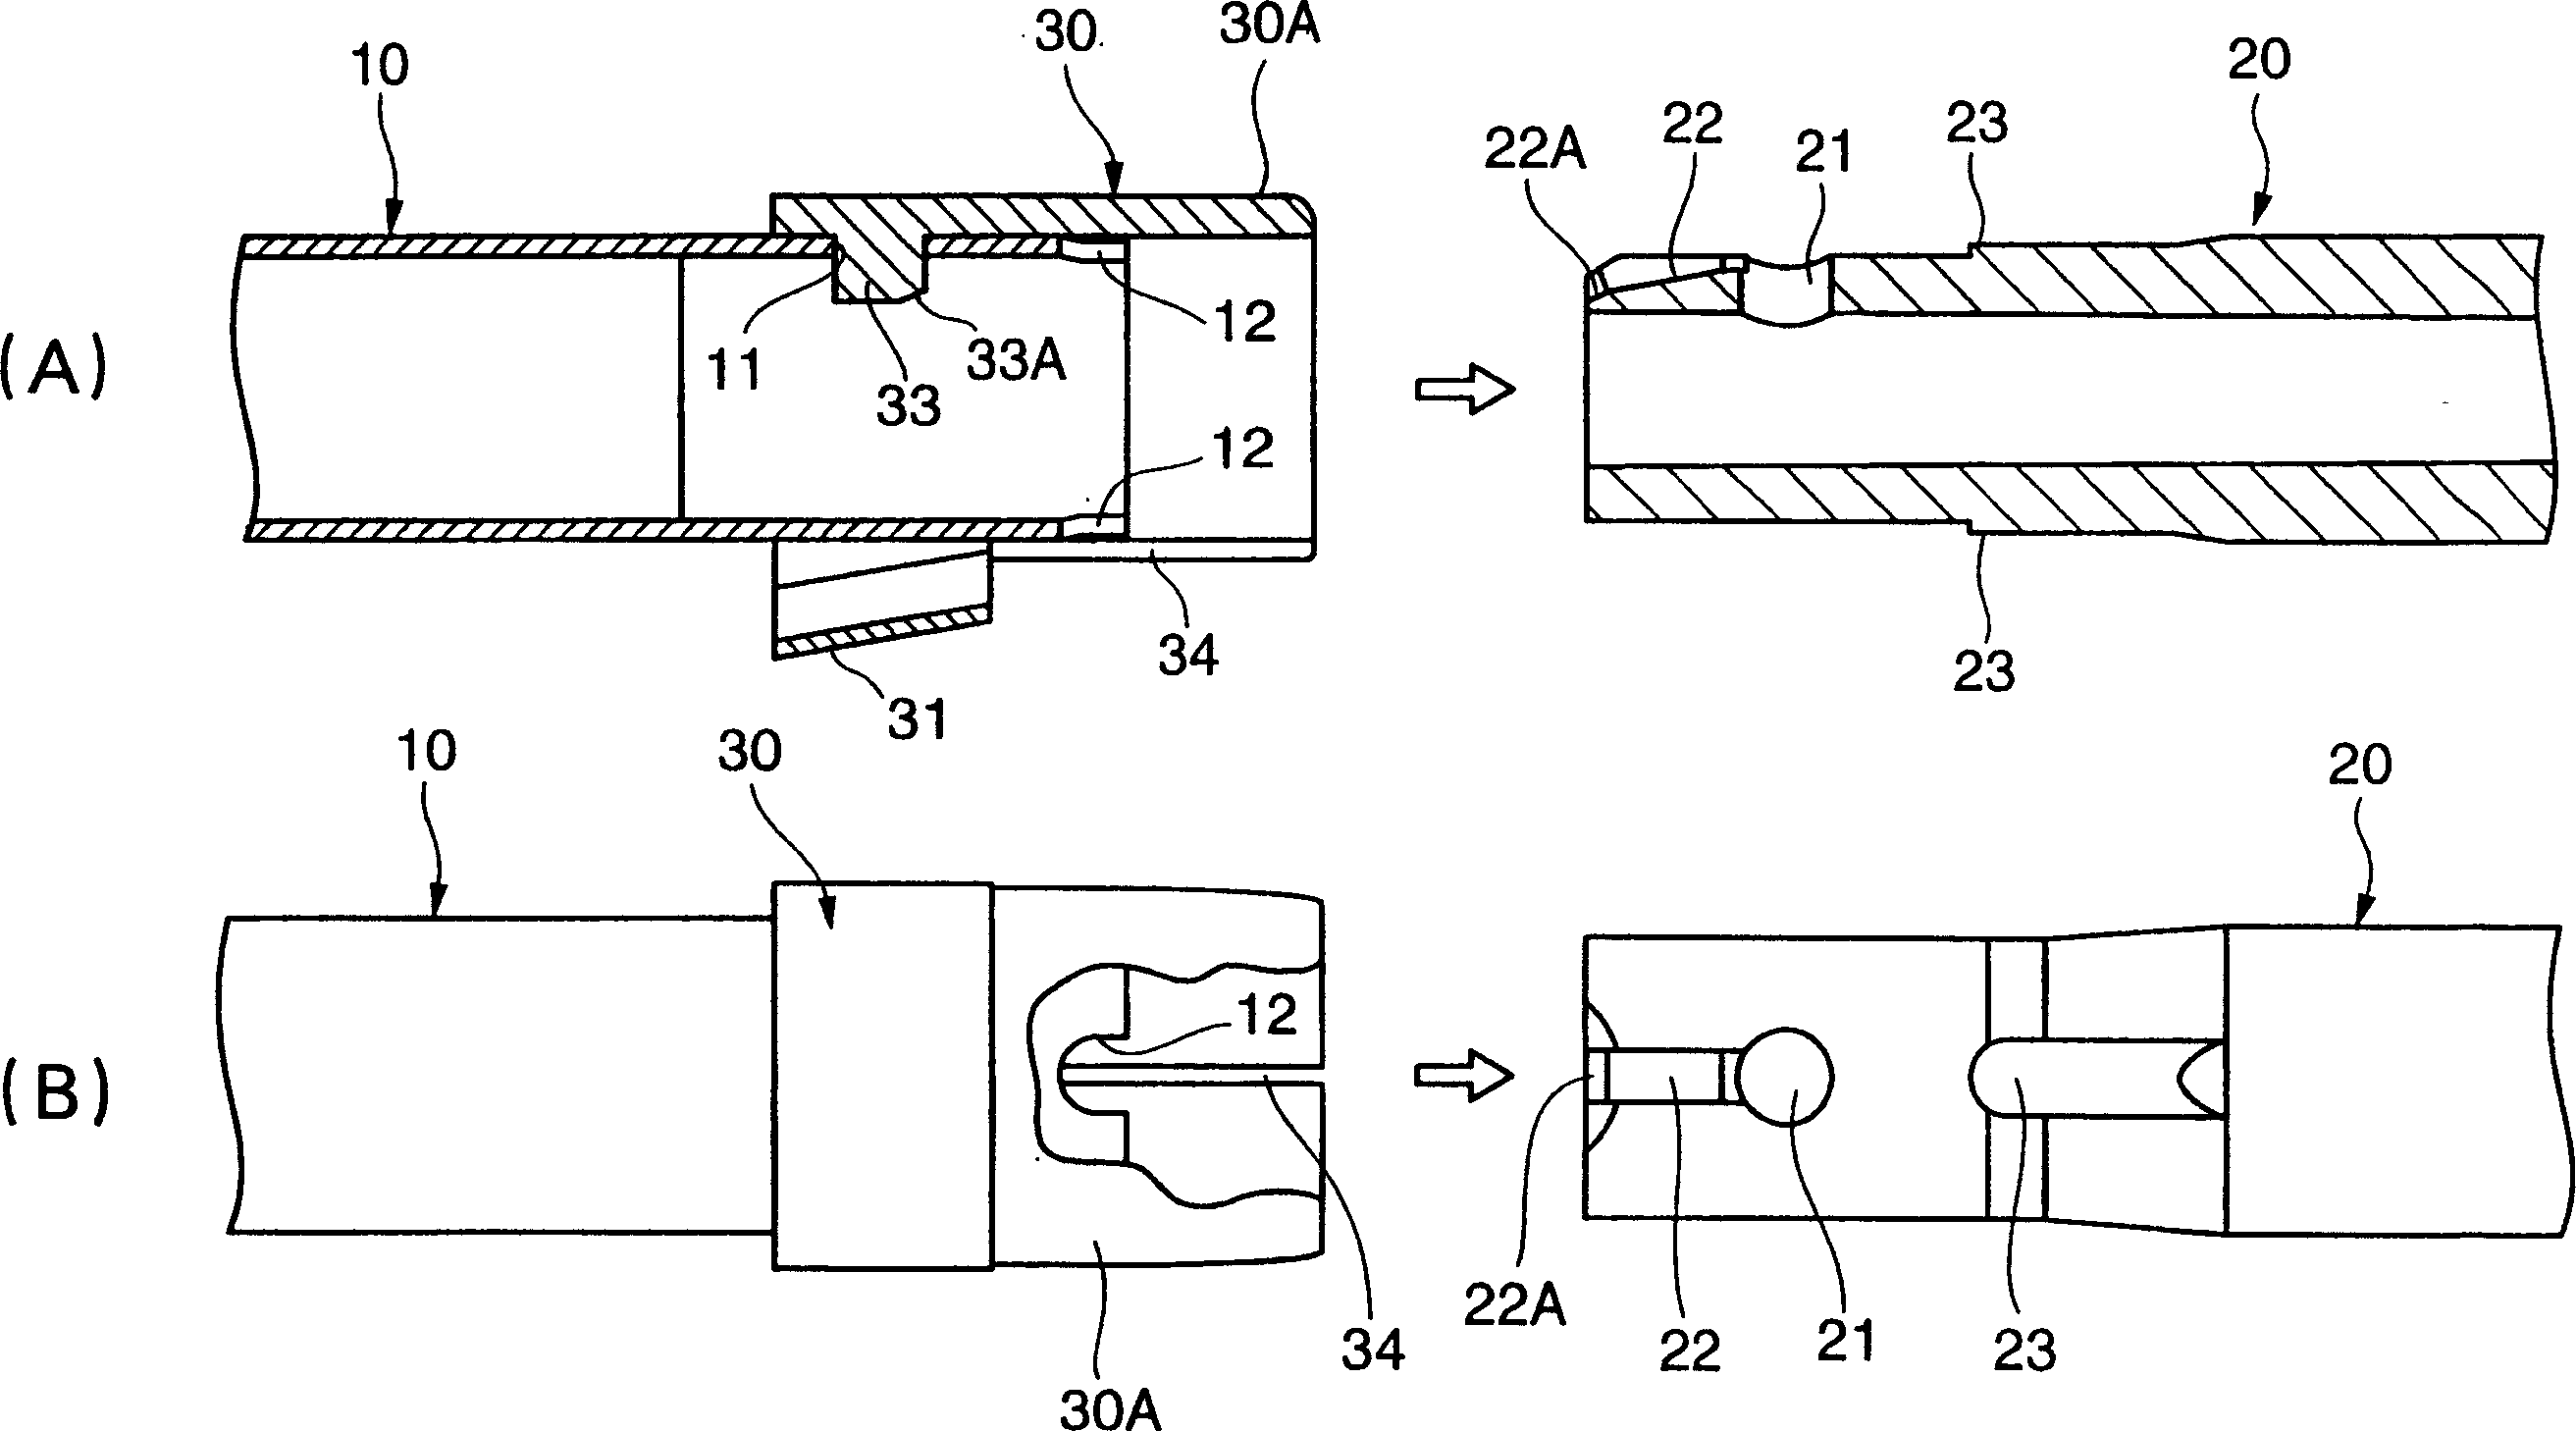 Connecting structure for rod